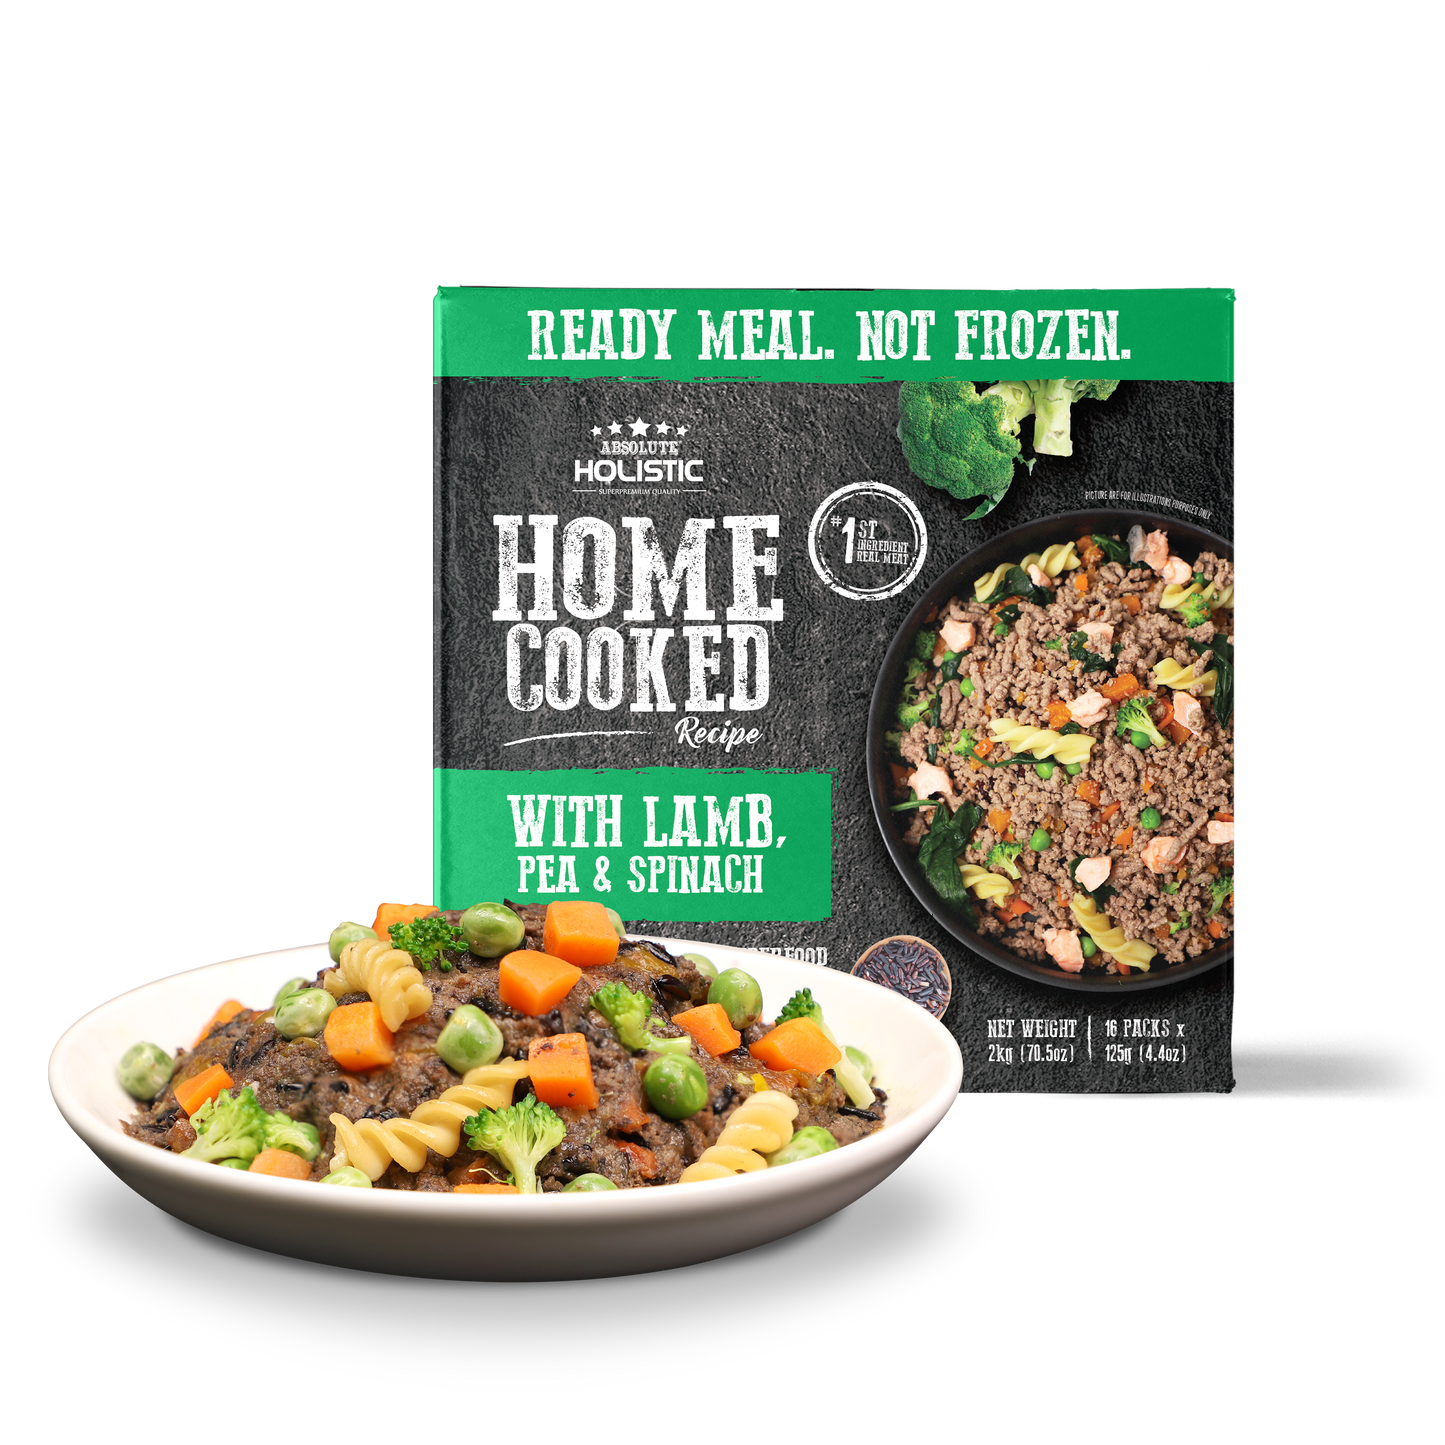 [Bundle Deal] Absolute Holistic Home Cooked Recipe Lamb, Peas & Spinach Wet Dog Food (2 Sizes)